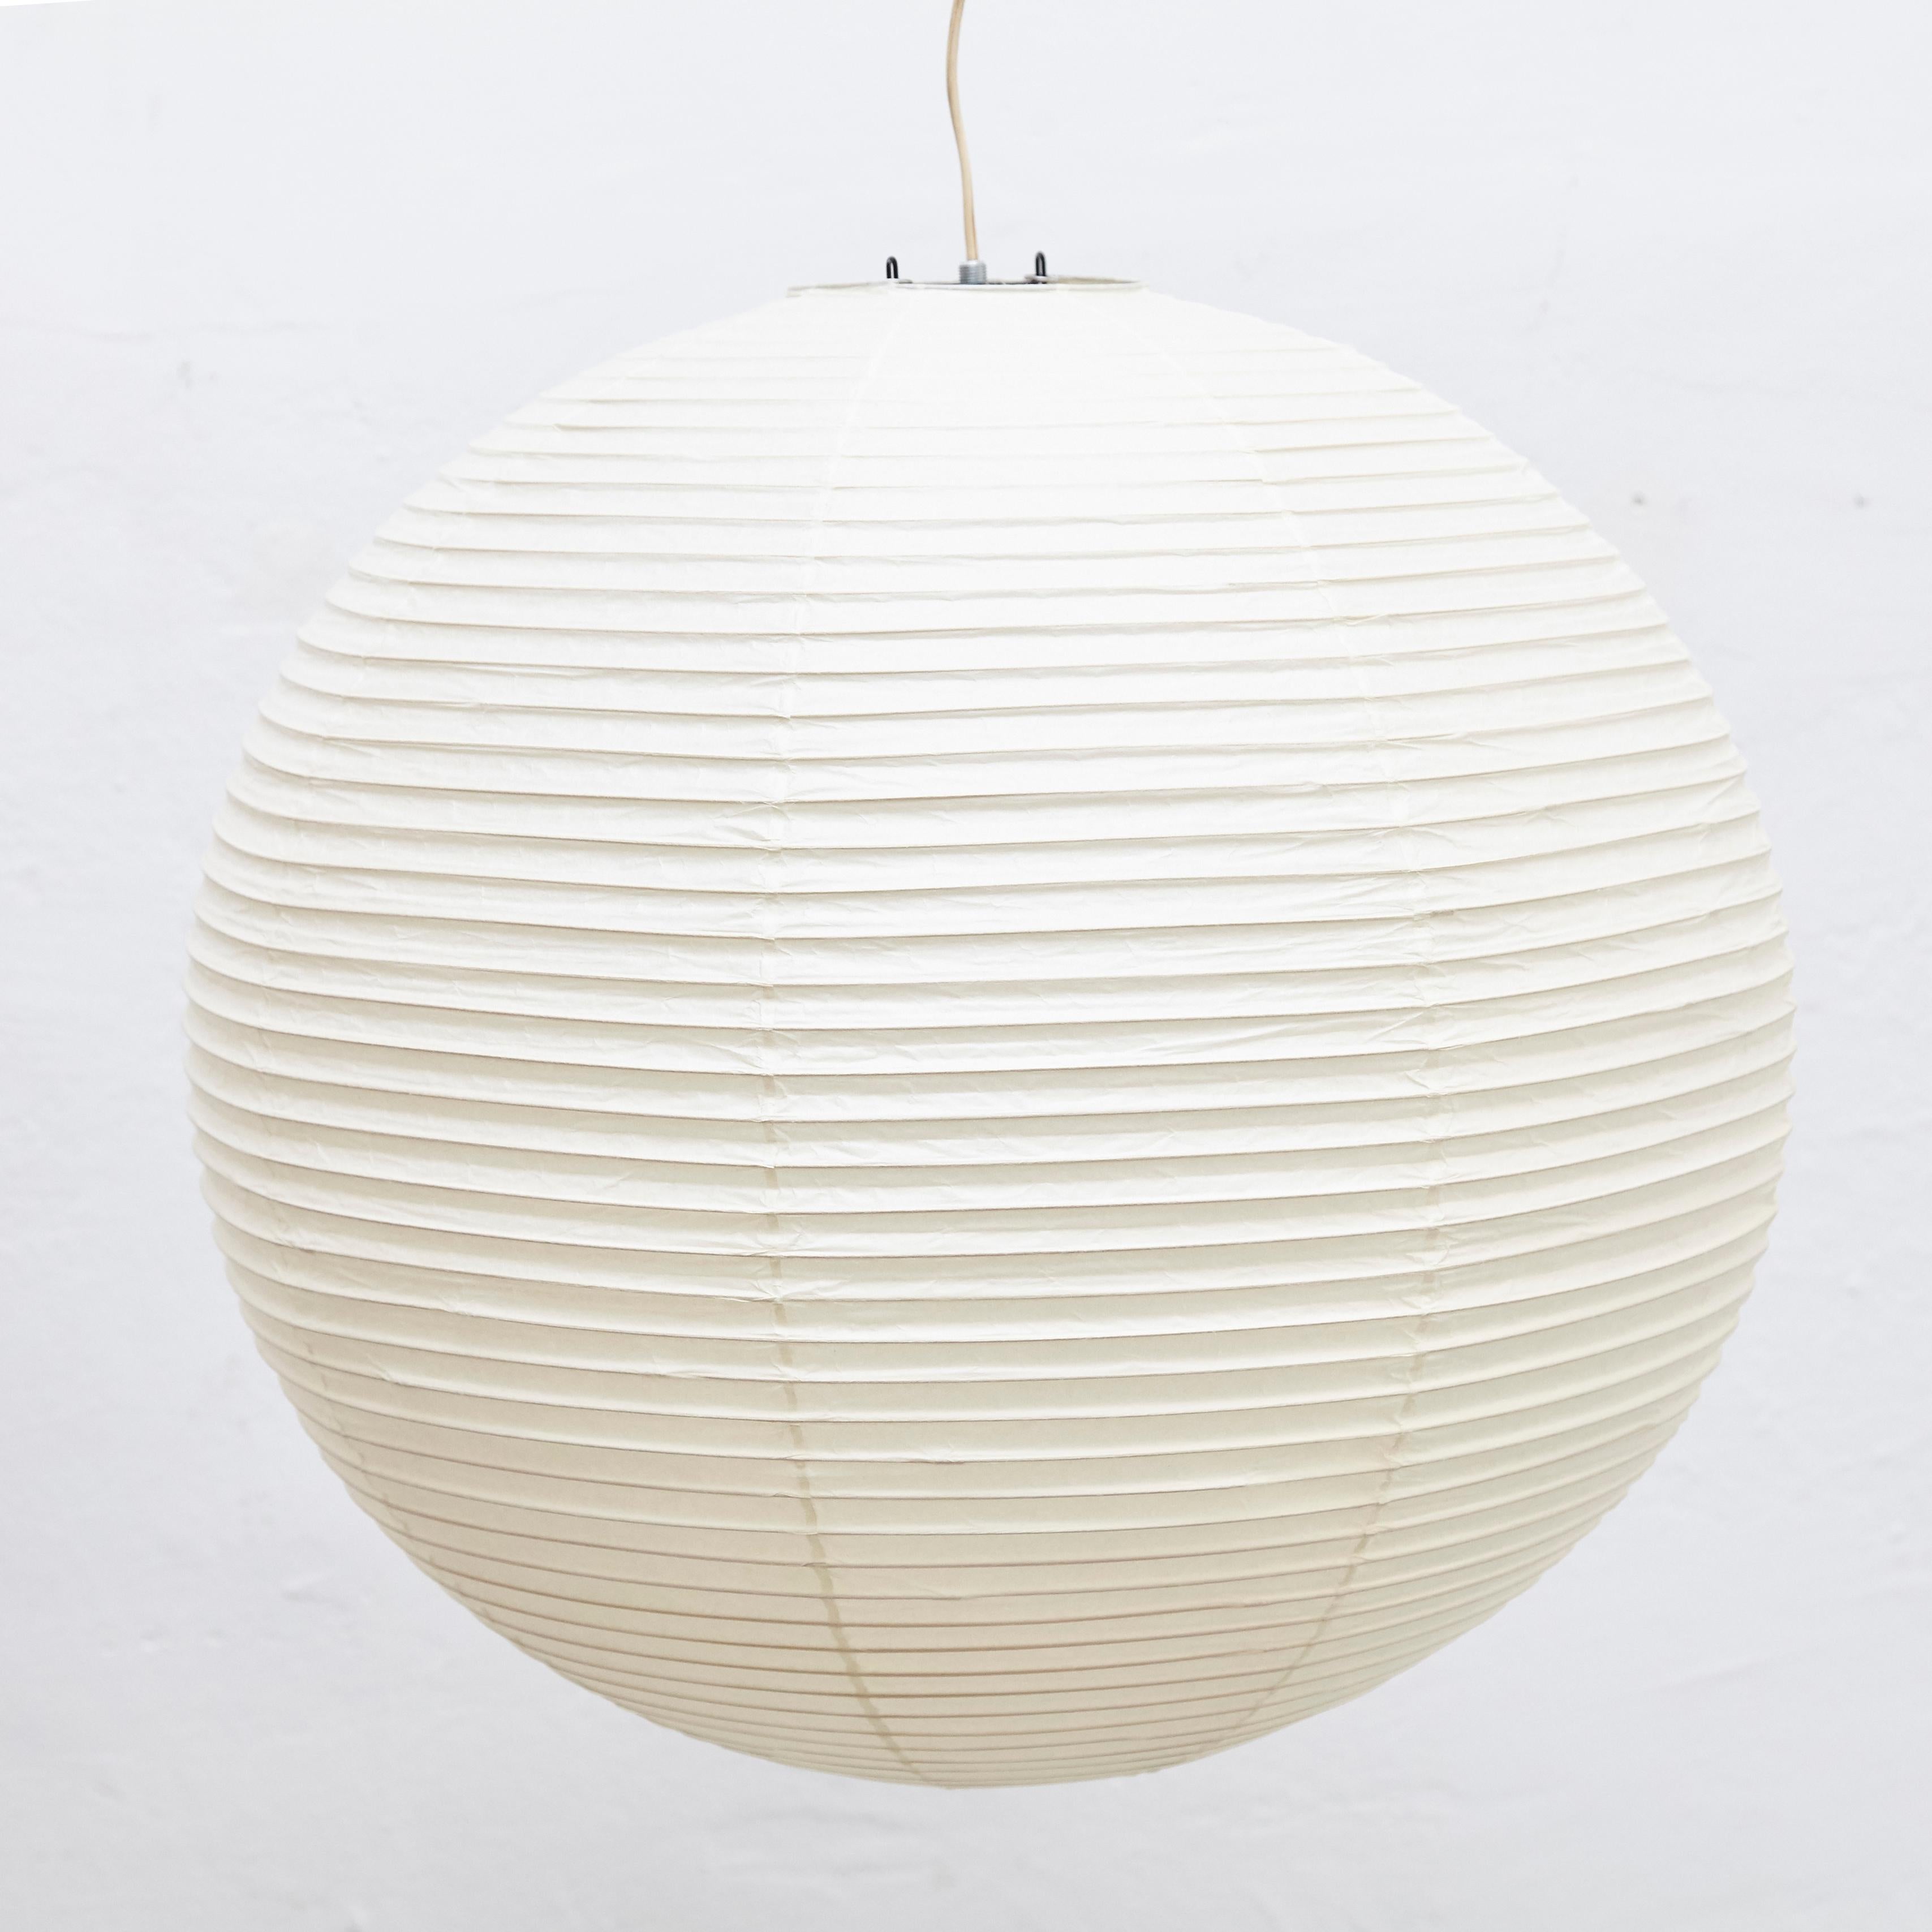 Ceiling Lamp, designed by Isamu Noguchi.
Manufactured by Ozeki & Company Ltd. (Japan.)
Bamboo ribbing structure covered by washi paper manufactured according to the traditional procedures.

In good vintage condition.

Edition signed with